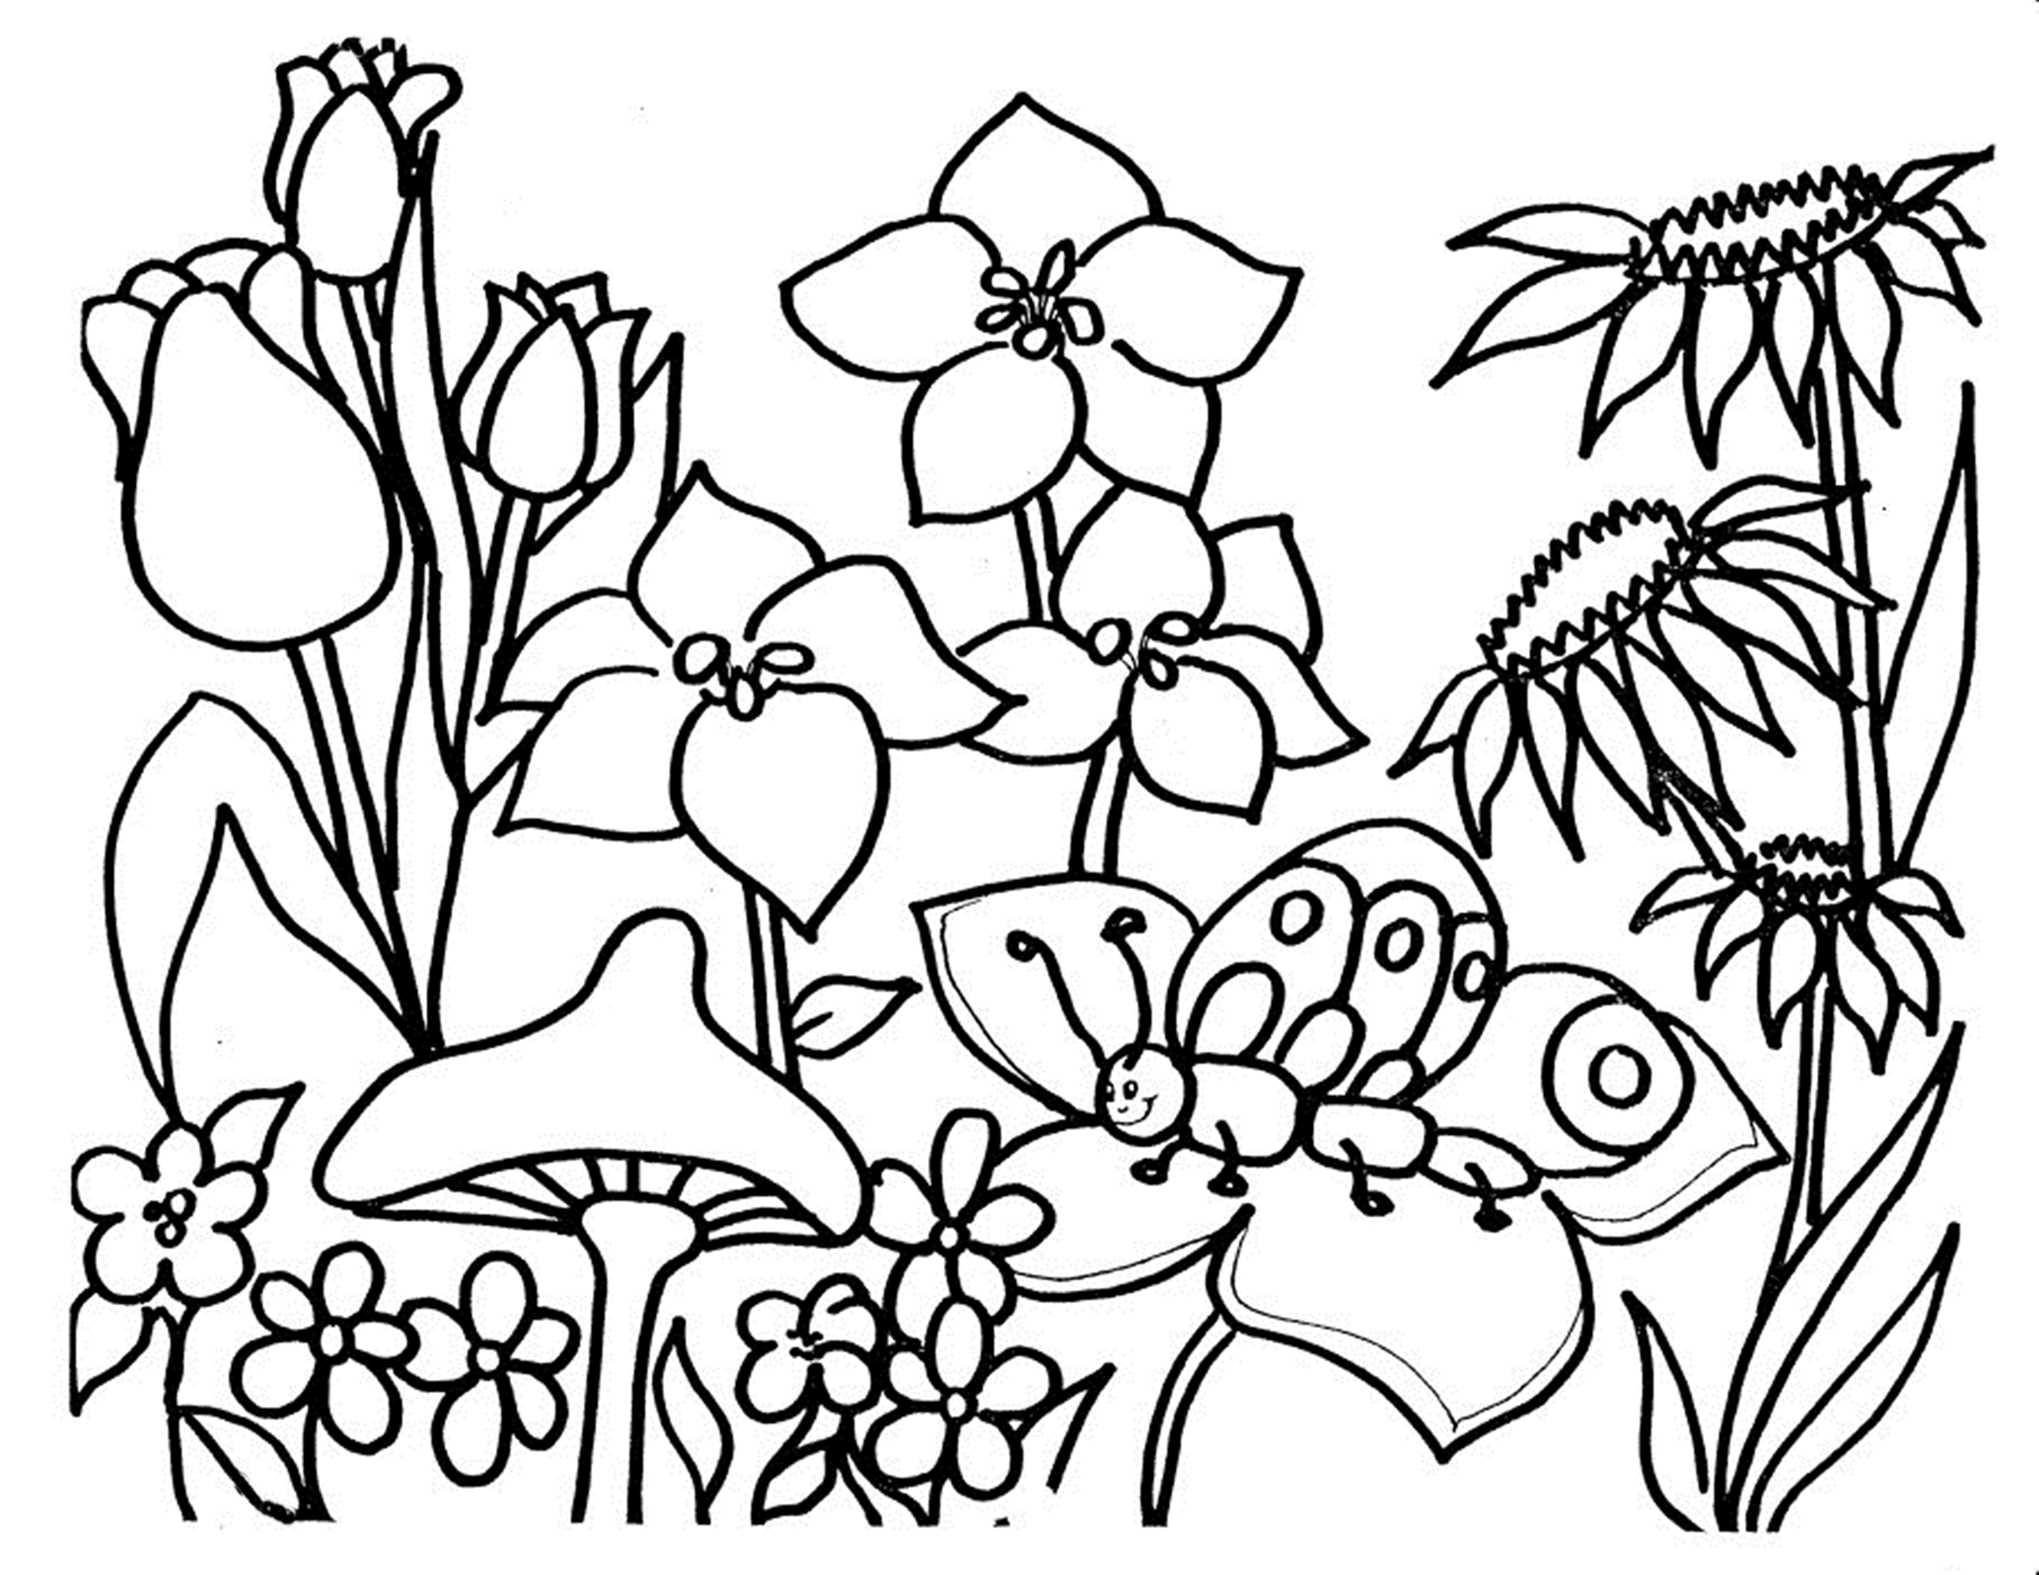 Coloring Pictures Printable Flowers - Coloring Pages